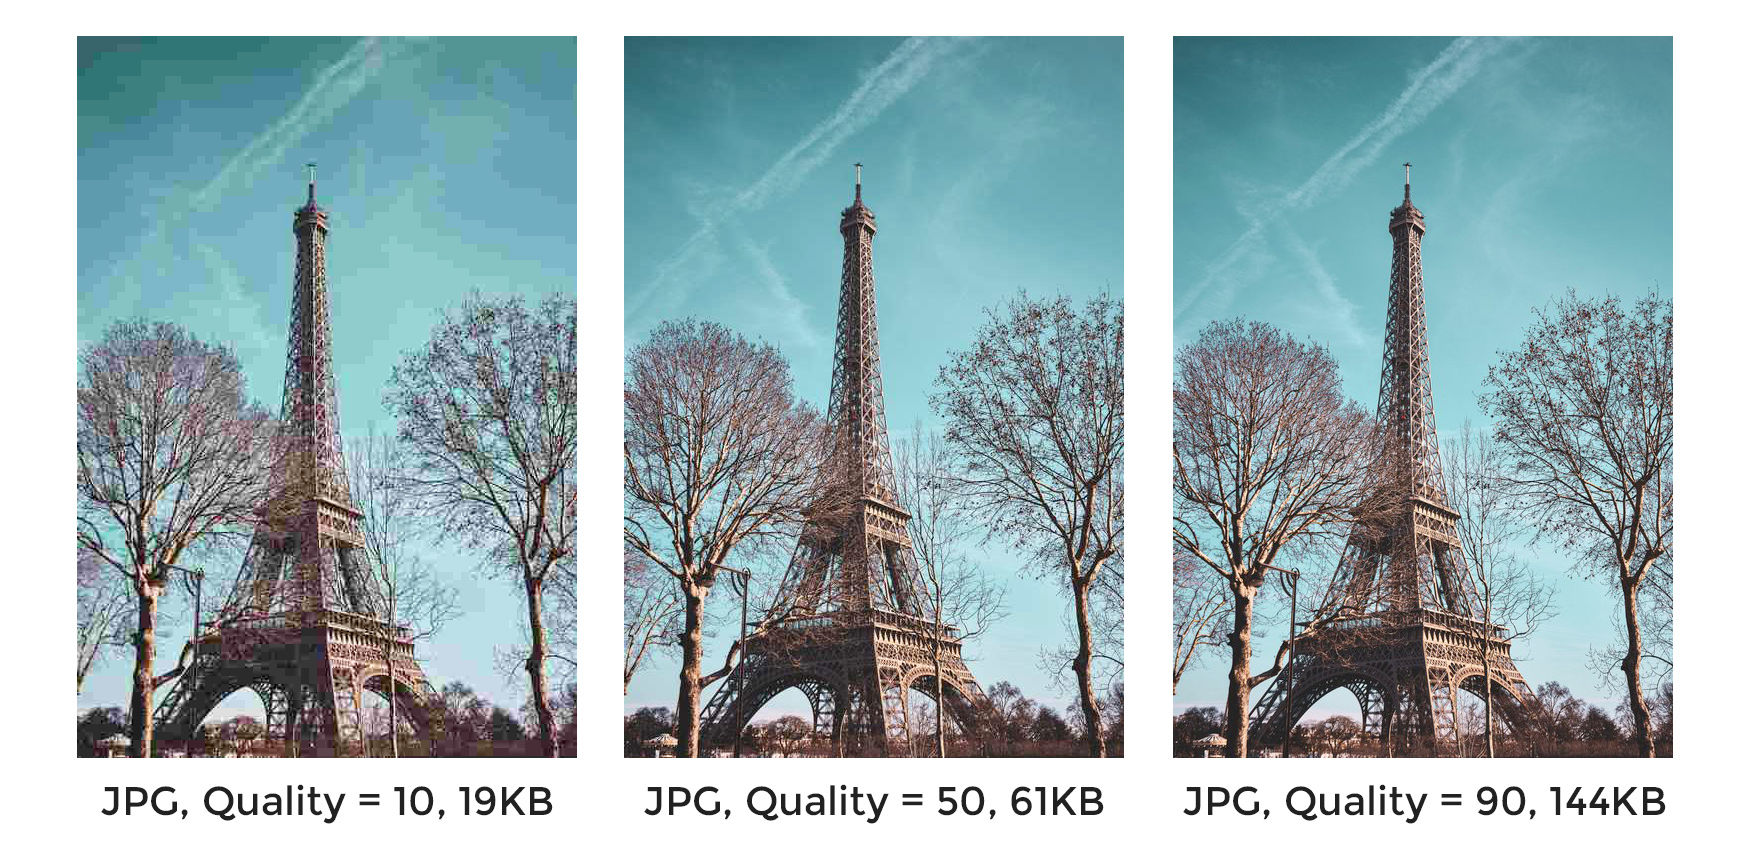 Images at different compression level and visual quality